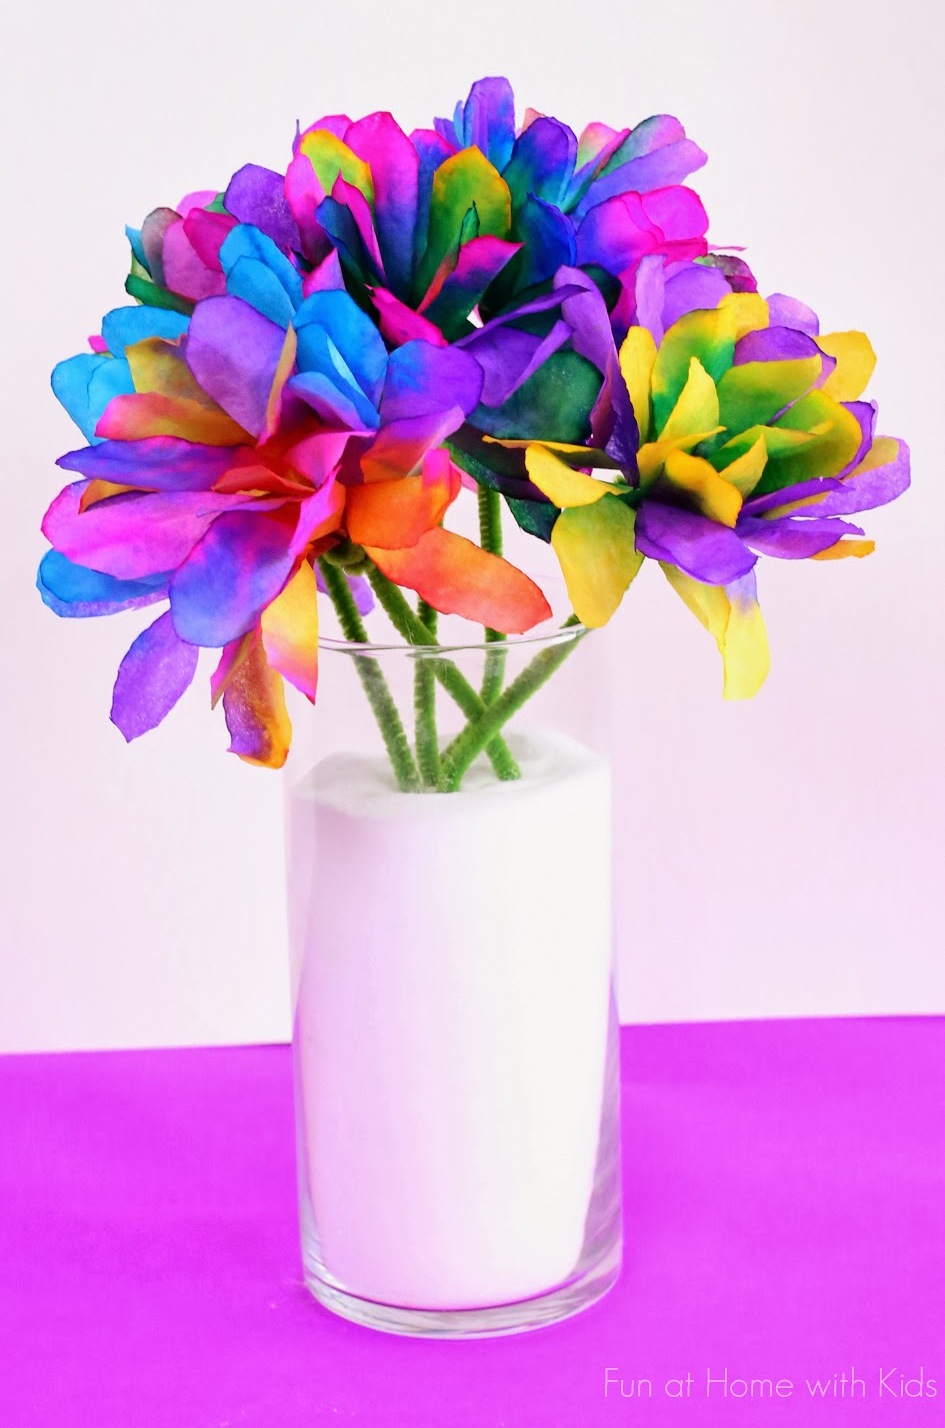 Make colorful flowers for Baha'i Ridvan